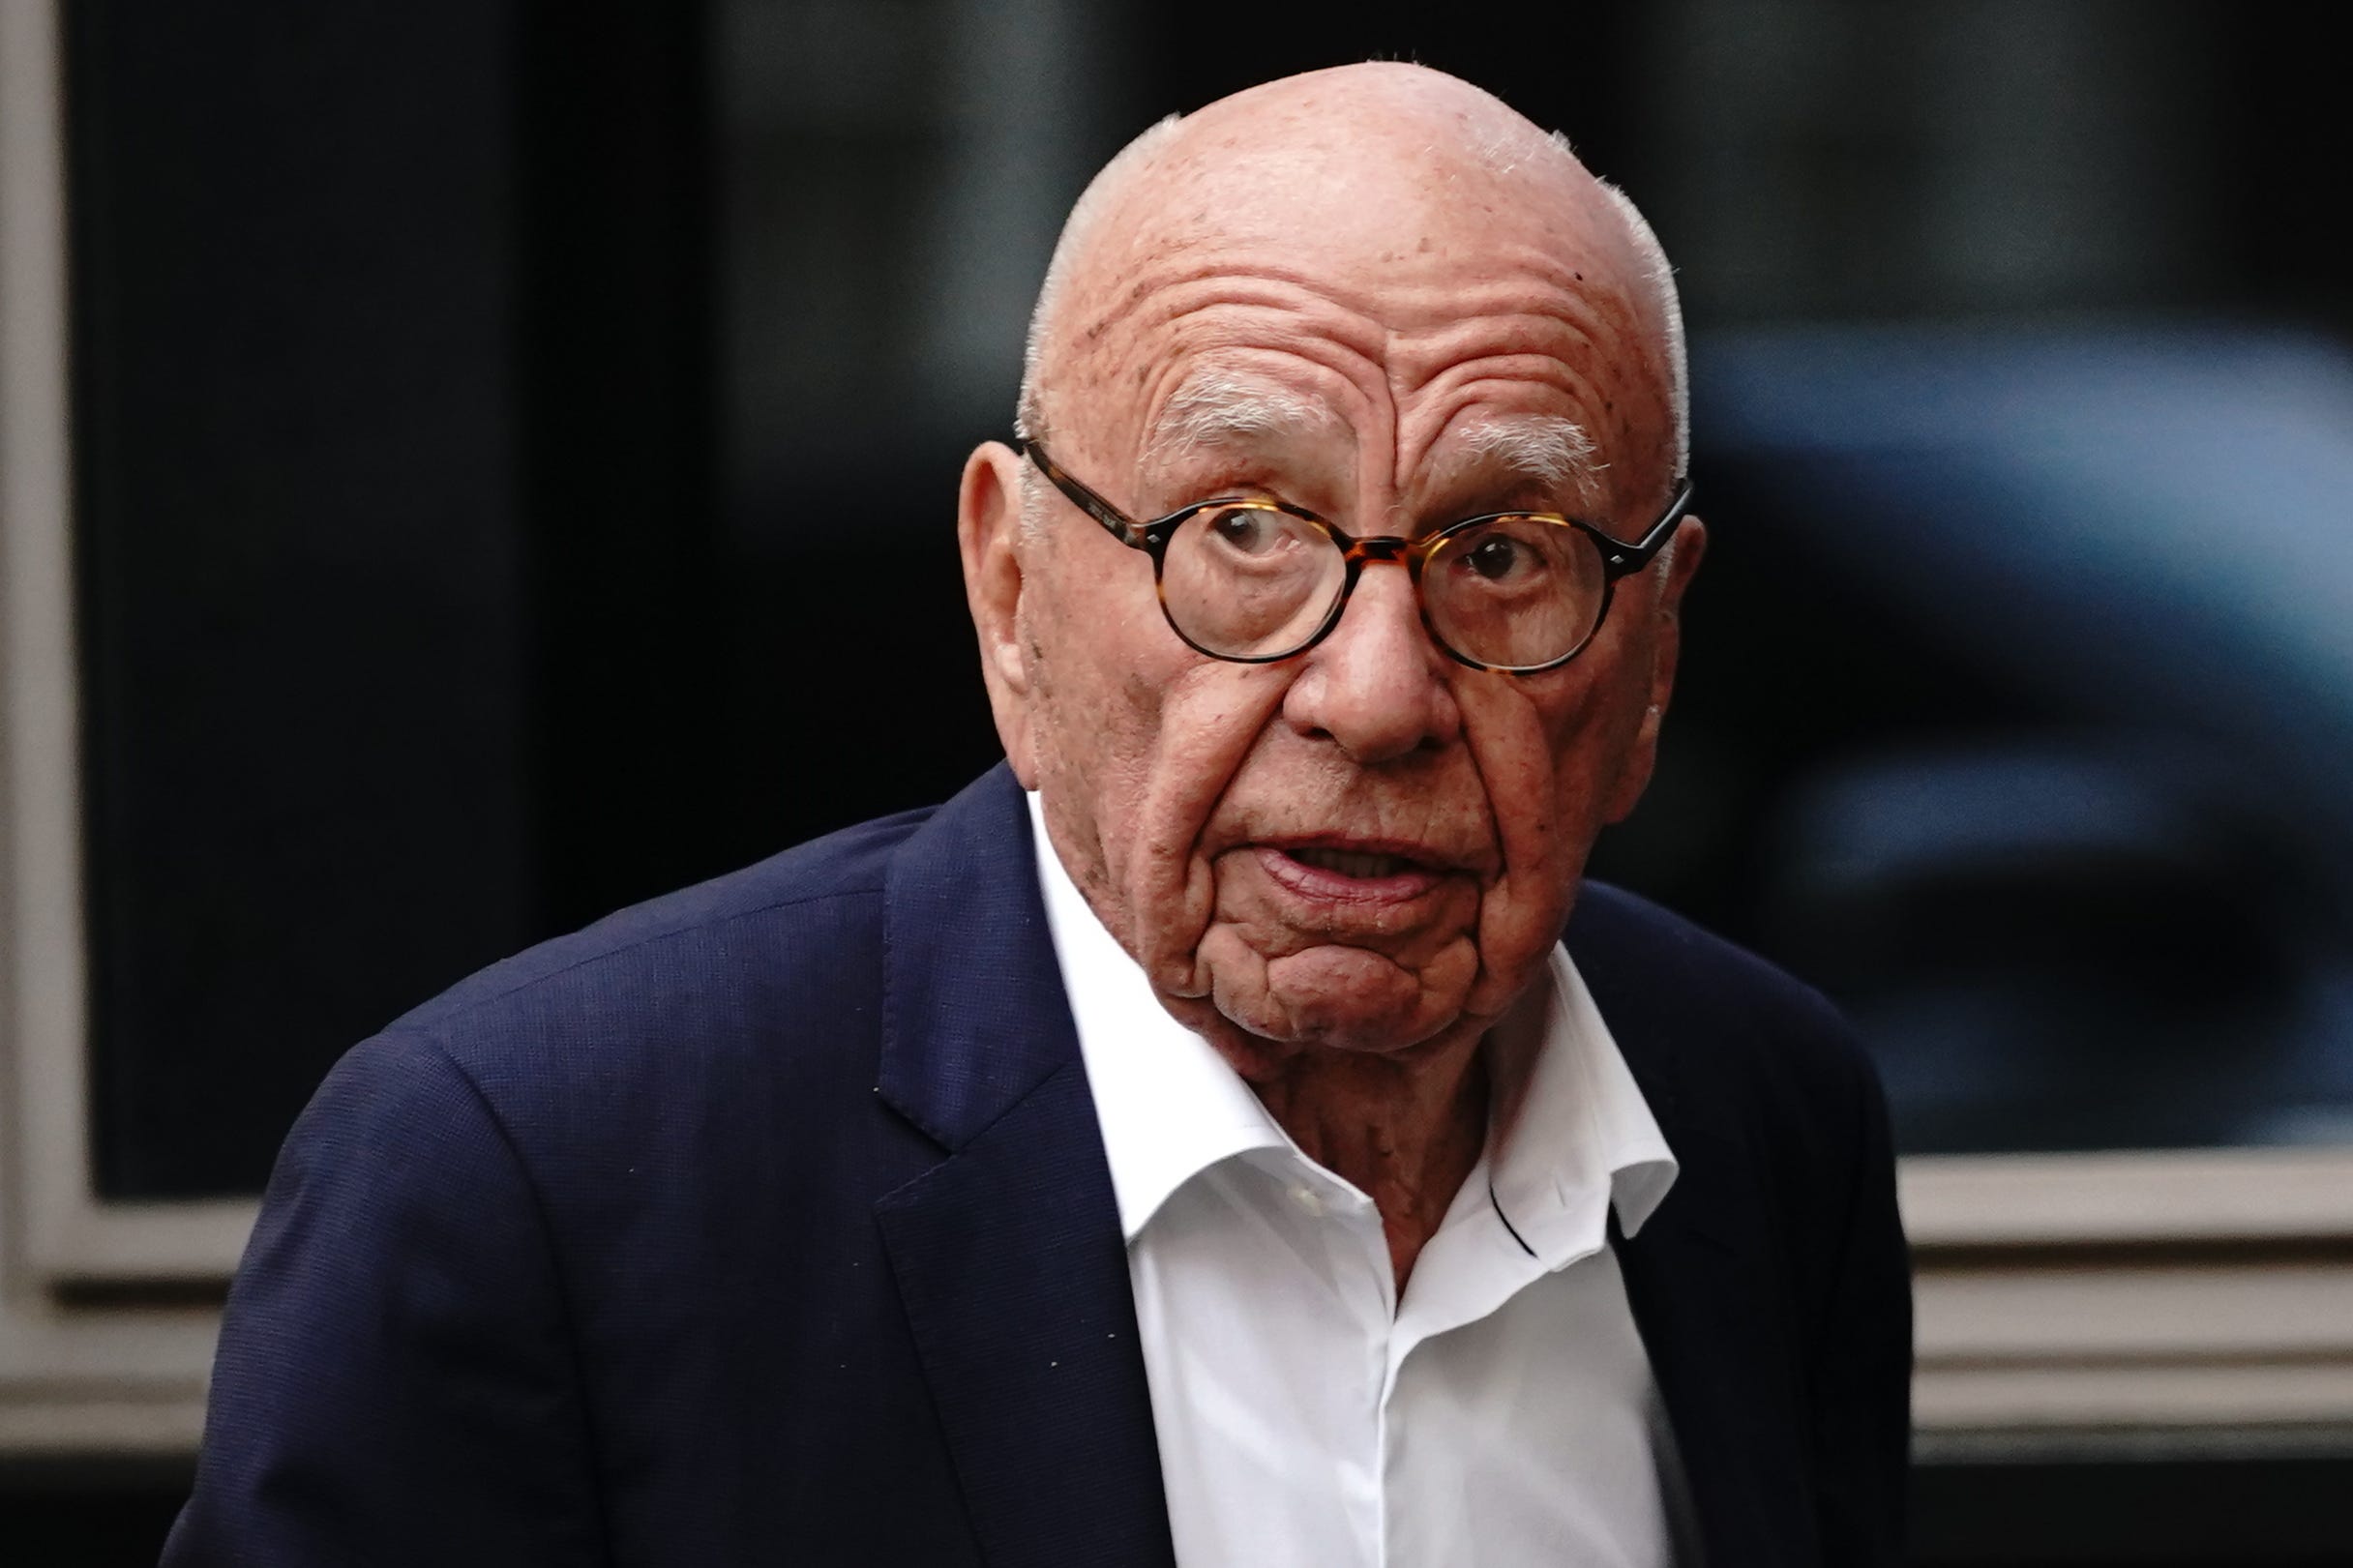 Rupert Murdoch was previously a director of News International, now News UK, the parent company of News Group Newspapers